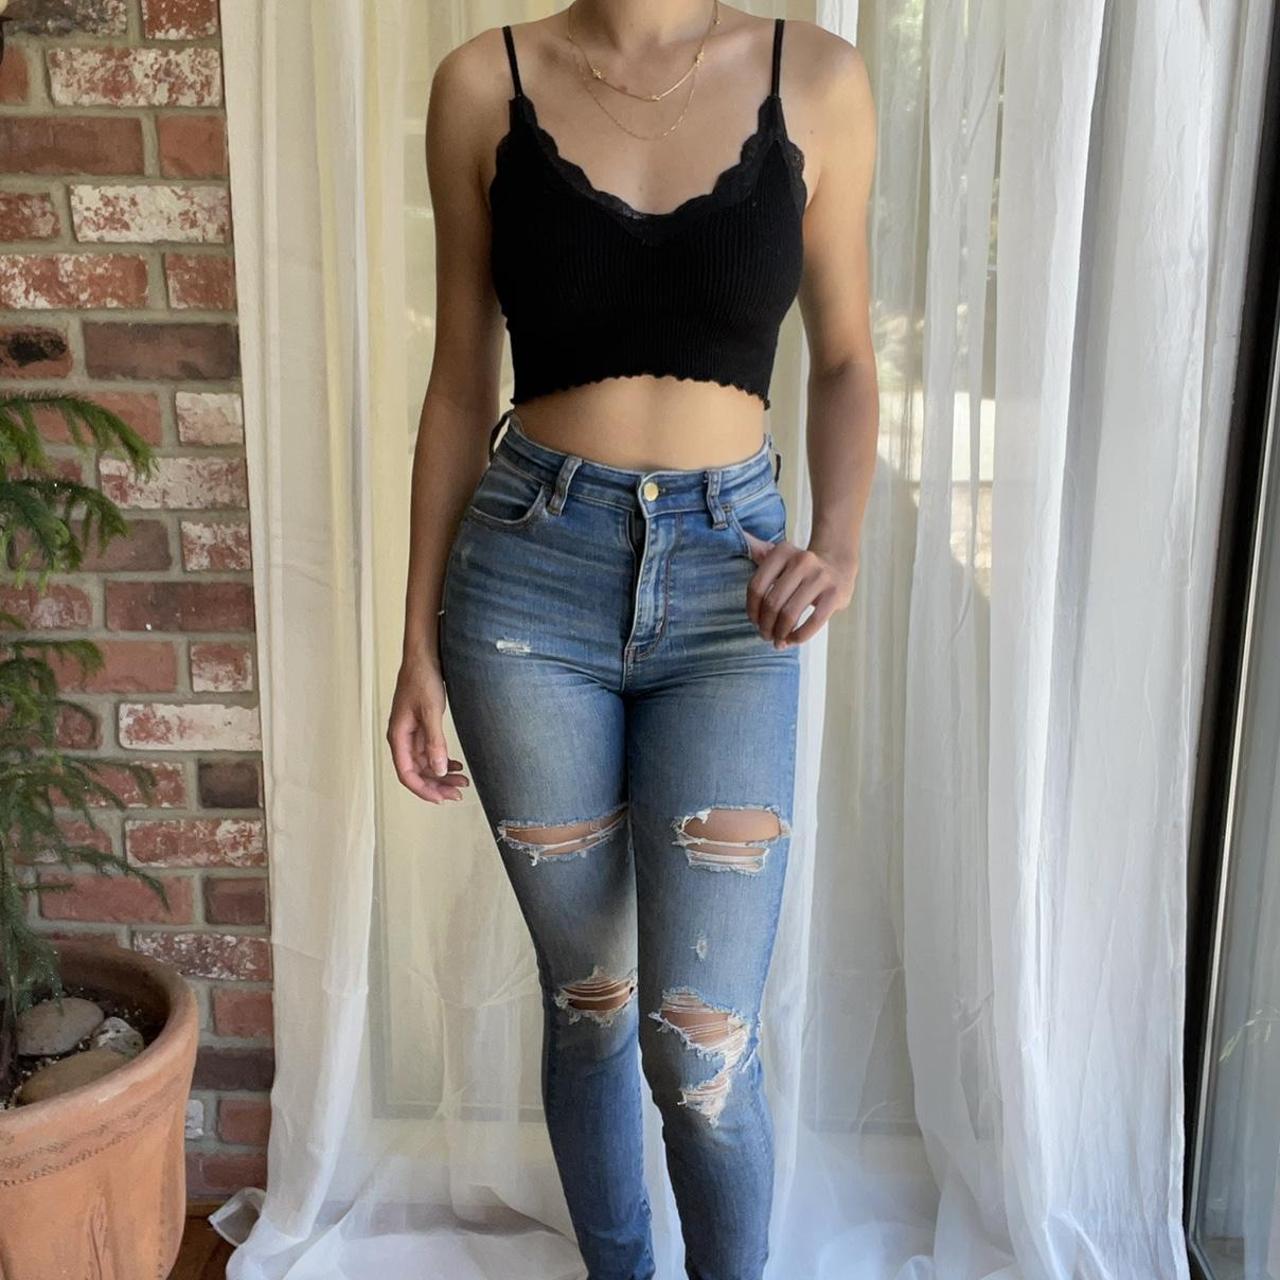 American Eagle Ripped long skinny jeans Size 2 - $16 - From Josie